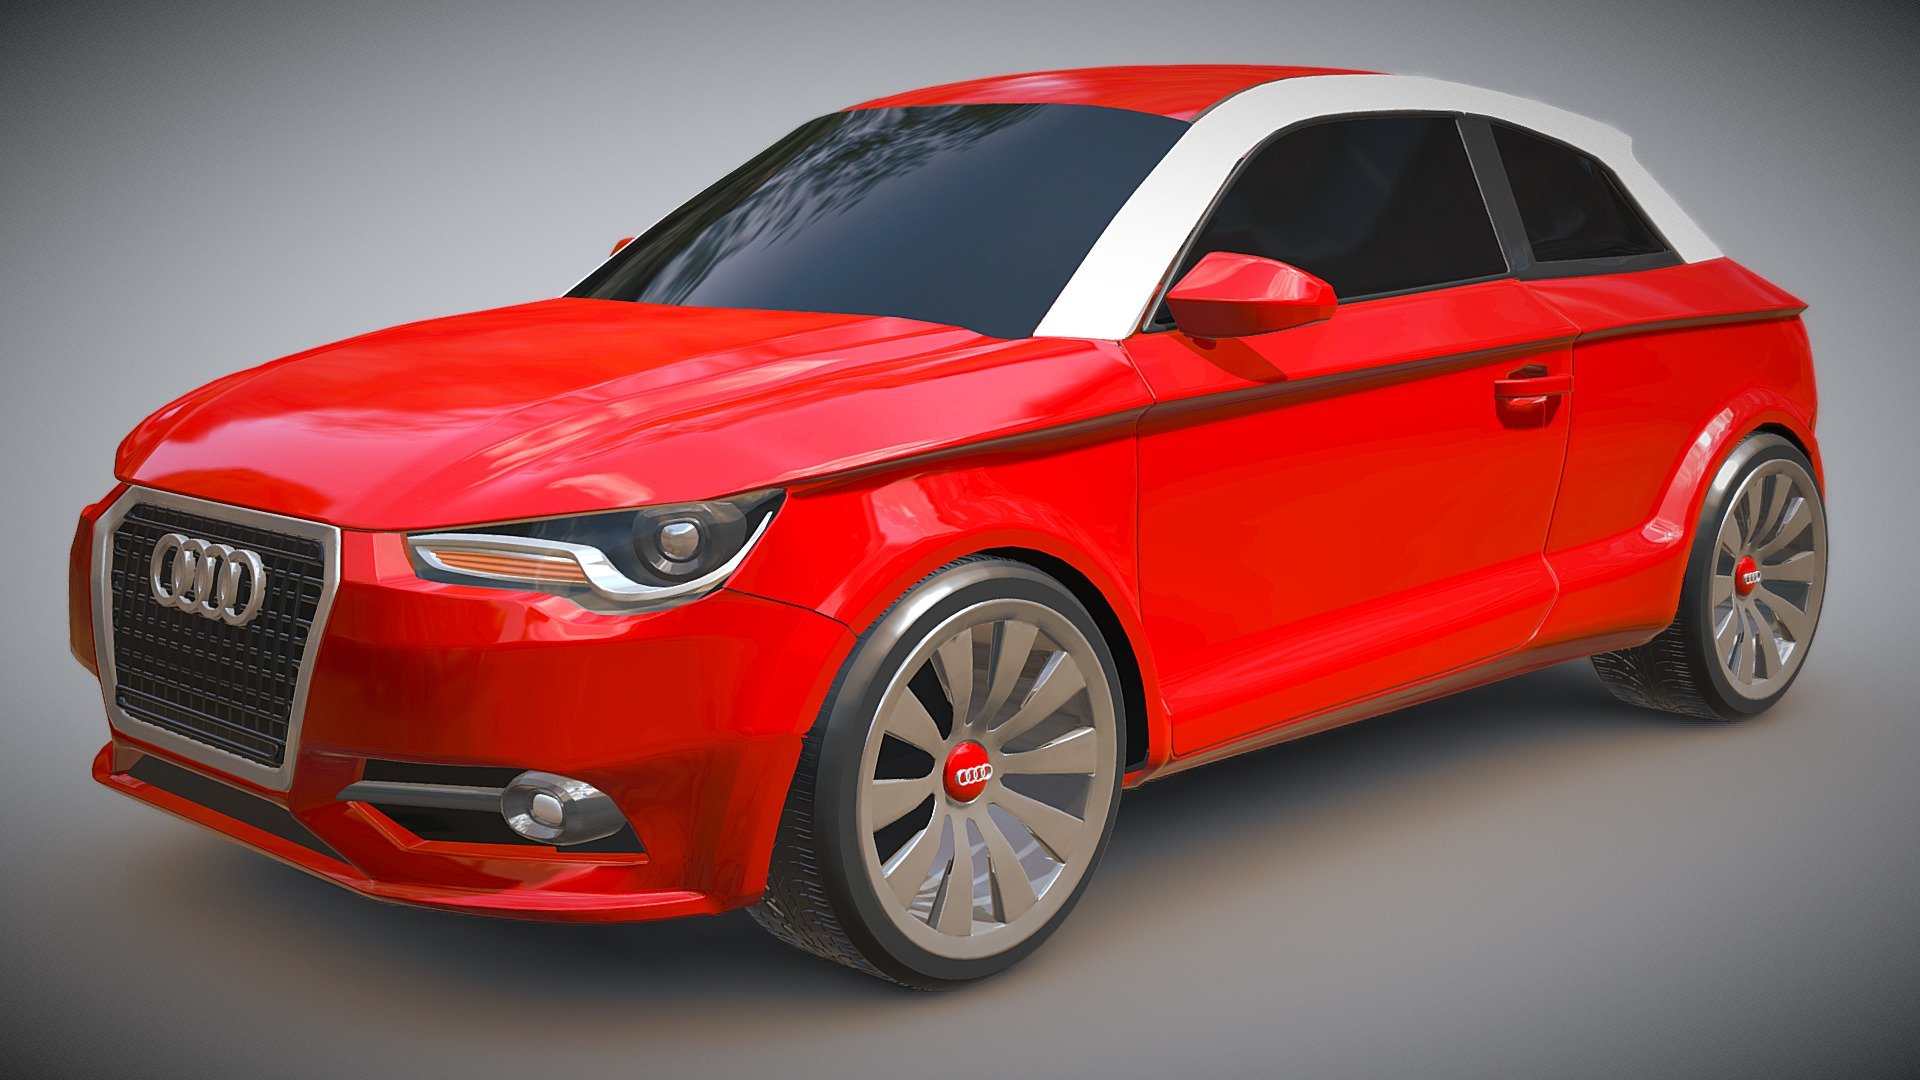 First generation of Audi A1 pretty detailed 3d model.I tightened up some forms,also I put bigger Audi logo to pop-up more. 
3d modelling with Blender3d 2.79 version.There are no textures and no interior objects for this product.Rendering previews created with cycles rendering engine.If you need to change something on this 3d model,or need with less subdivsions,use blender file where you can remove subsurface modifier.Objects named by materials.Tire treads created from bunch of polygons to get more realistic tires.Enjoy my car 3d model.

3ds file 
verts:787980 
polys:262260

obj file 
verts: 209782 
polys: 262660

Checked with GLC player - Audi A1 city car redesign - Buy Royalty Free 3D model by koleos3d 3d model